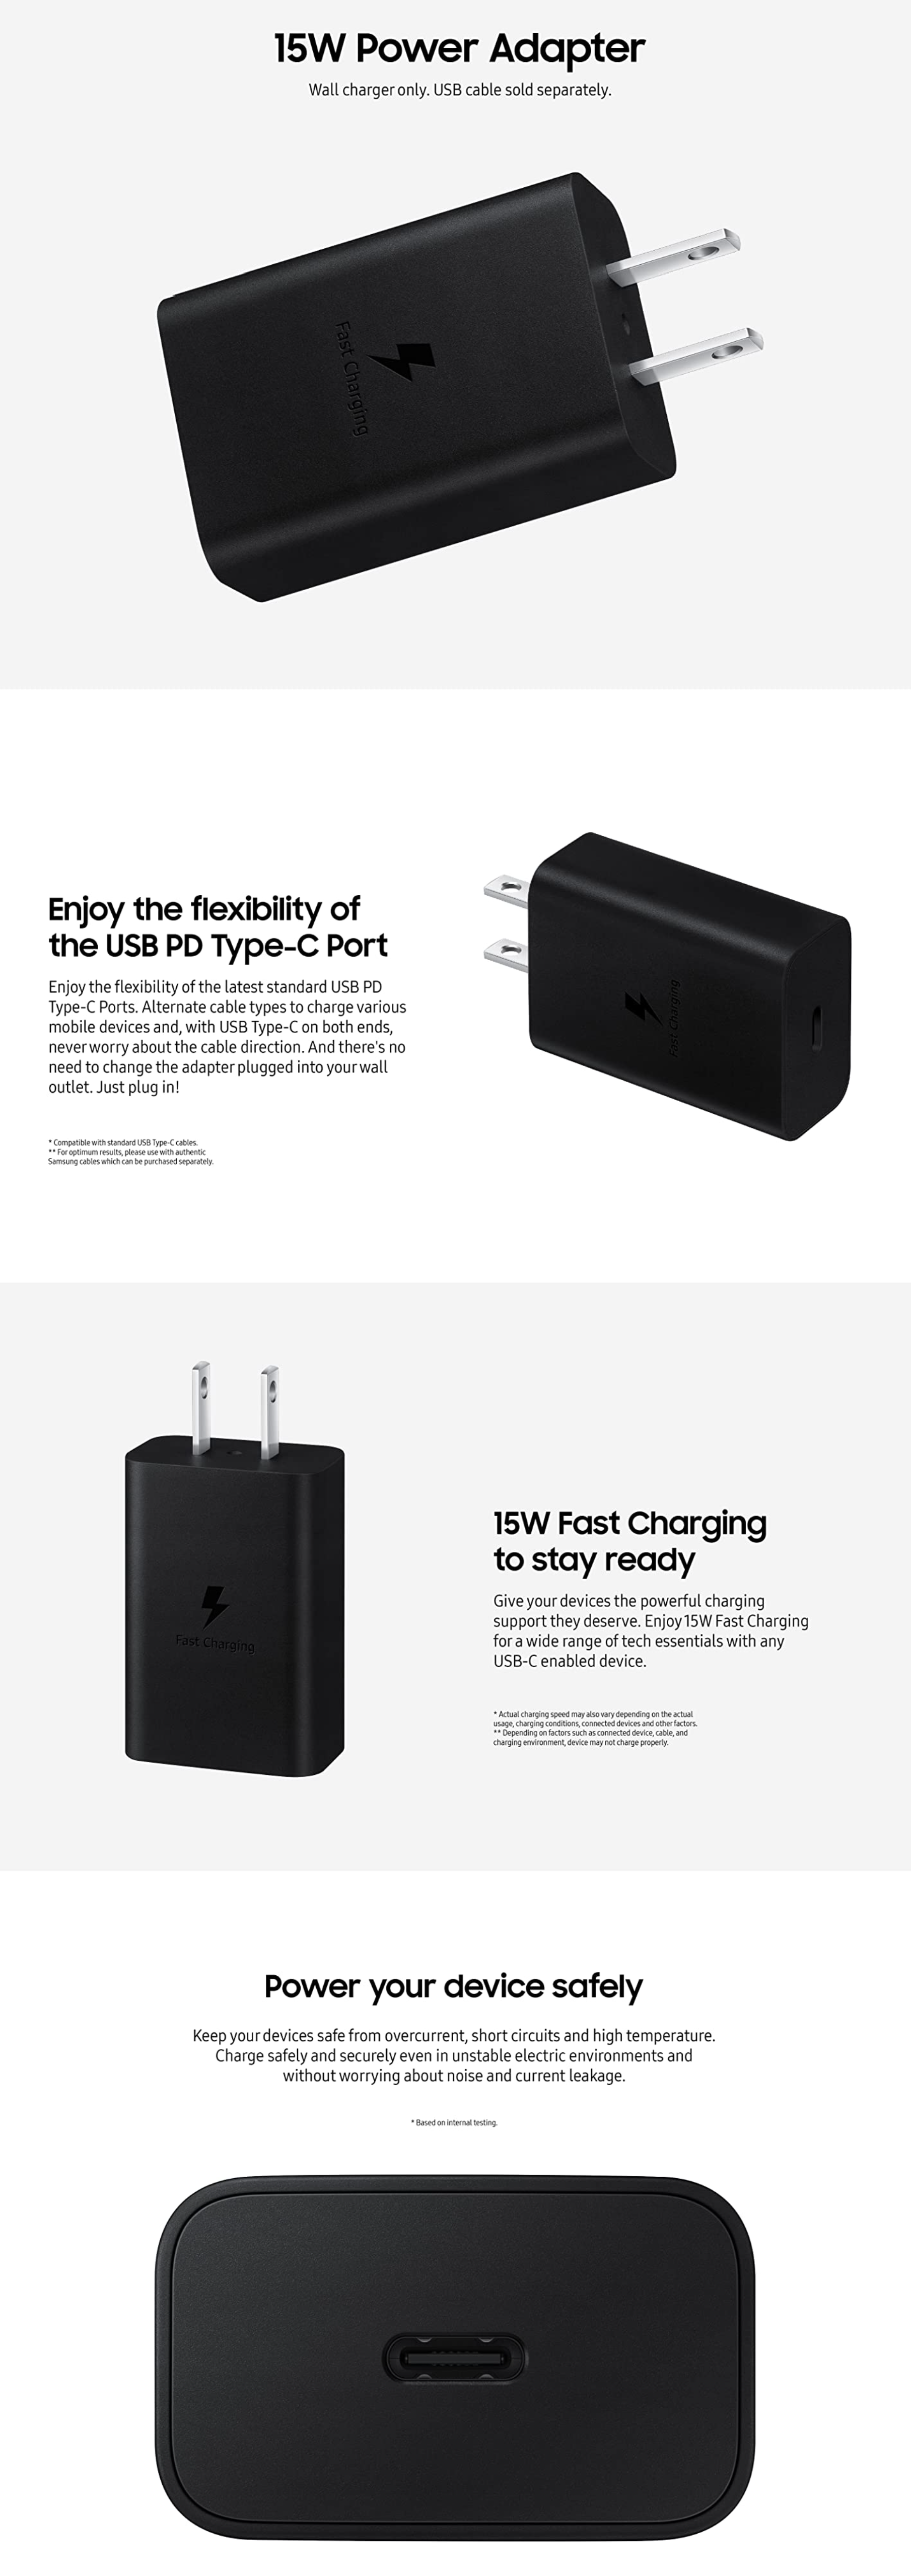 Samsung 15W Wall Charger Type C Only (Cable not Included), Black (SAMEPT1510N)